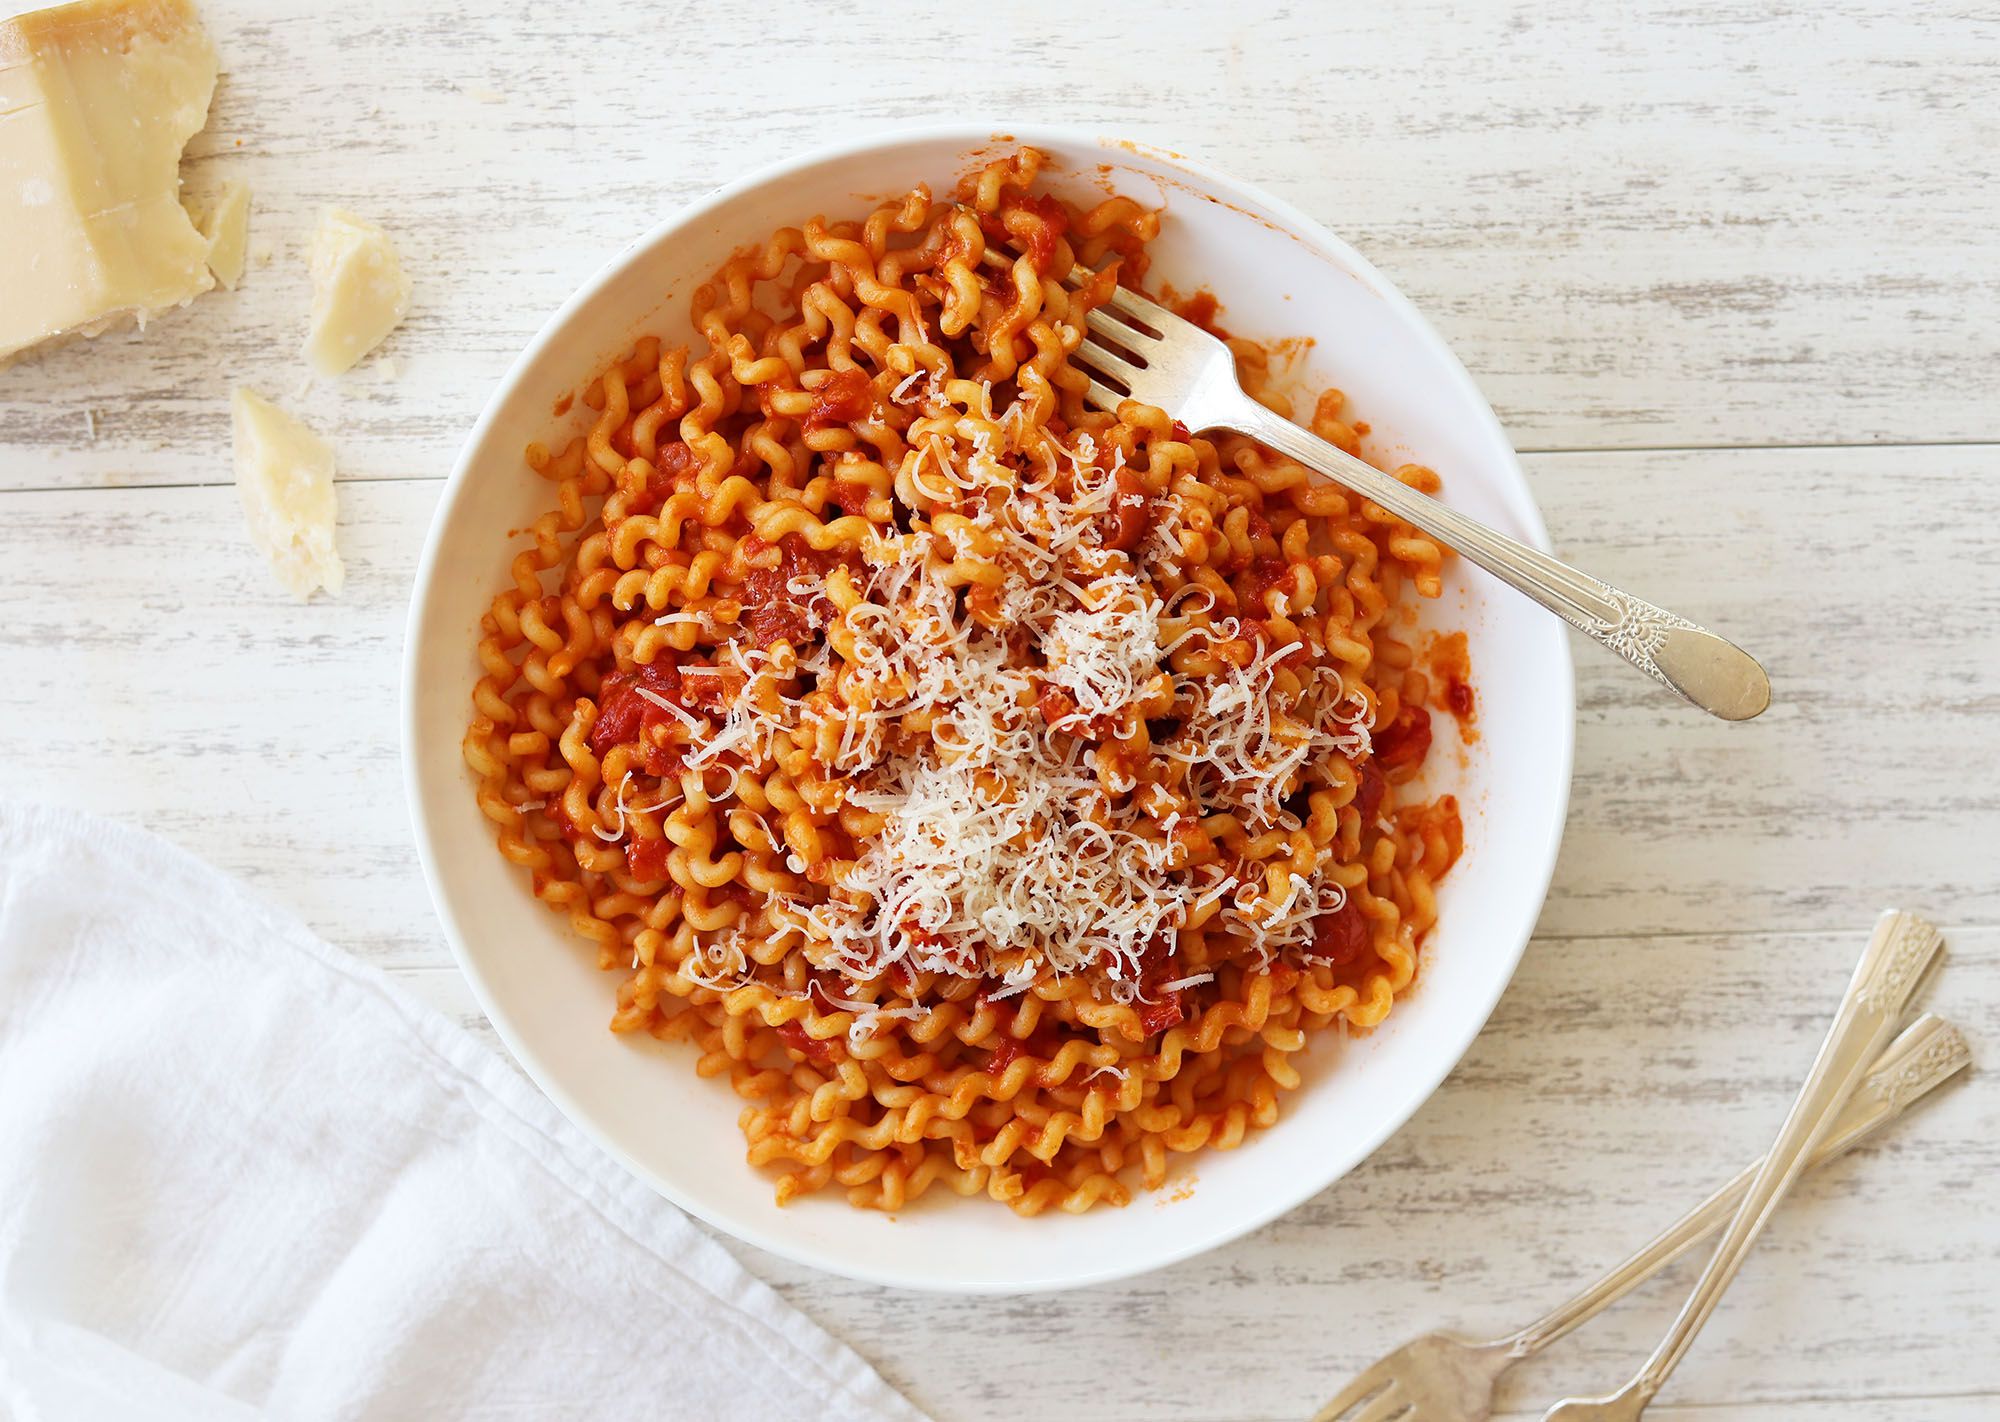 Calabrian Chili Pasta and Other 5-Minute Pasta Recipes